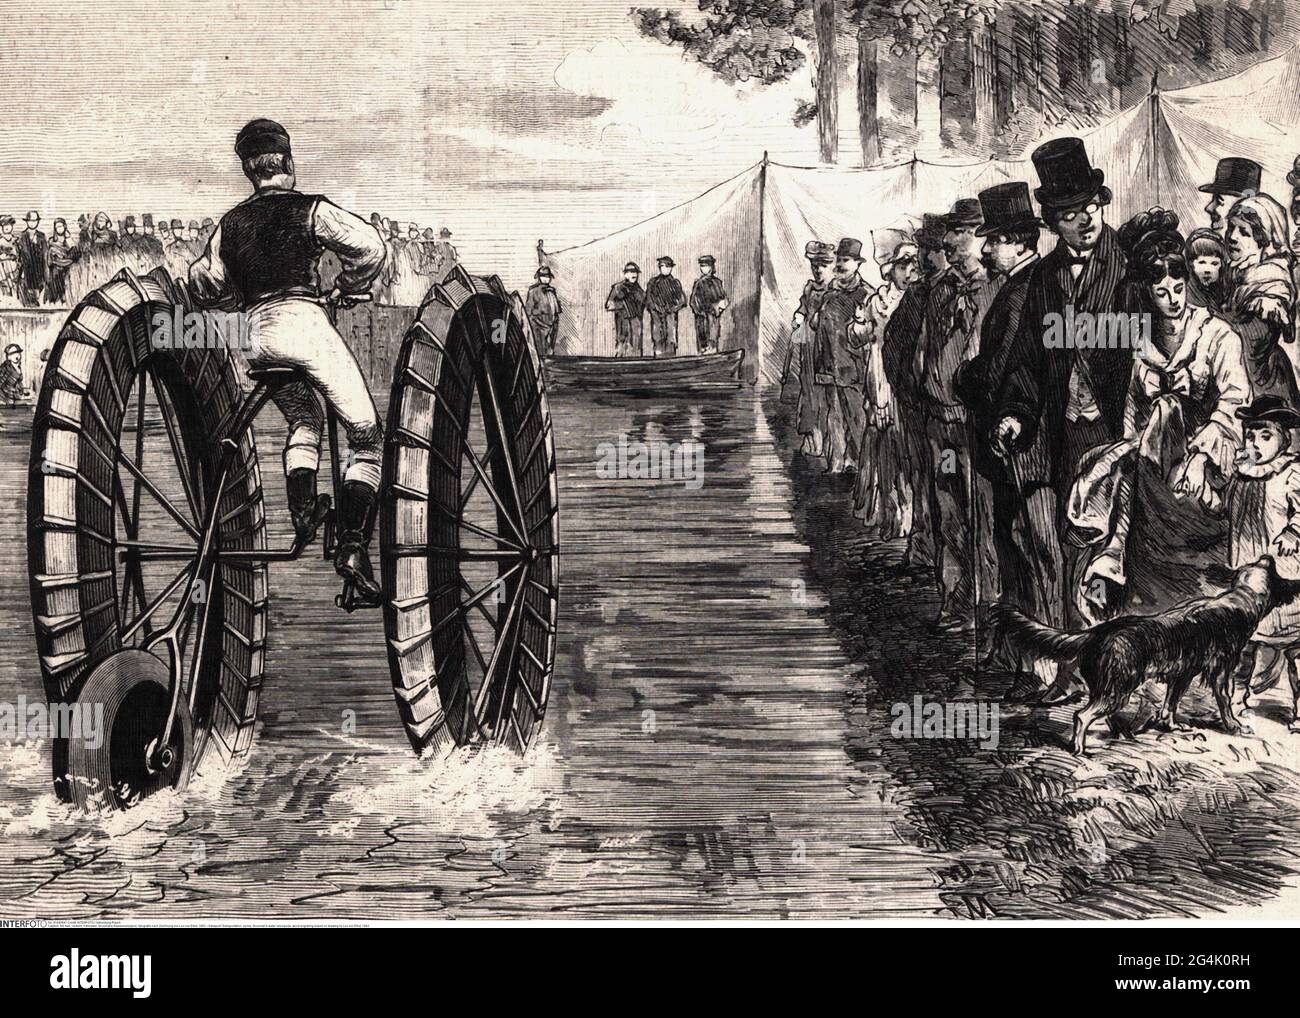 transport / transportation, cycles, Grooman's water velocipede, ARTIST'S COPYRIGHT HAS NOT TO BE CLEARED Stock Photo